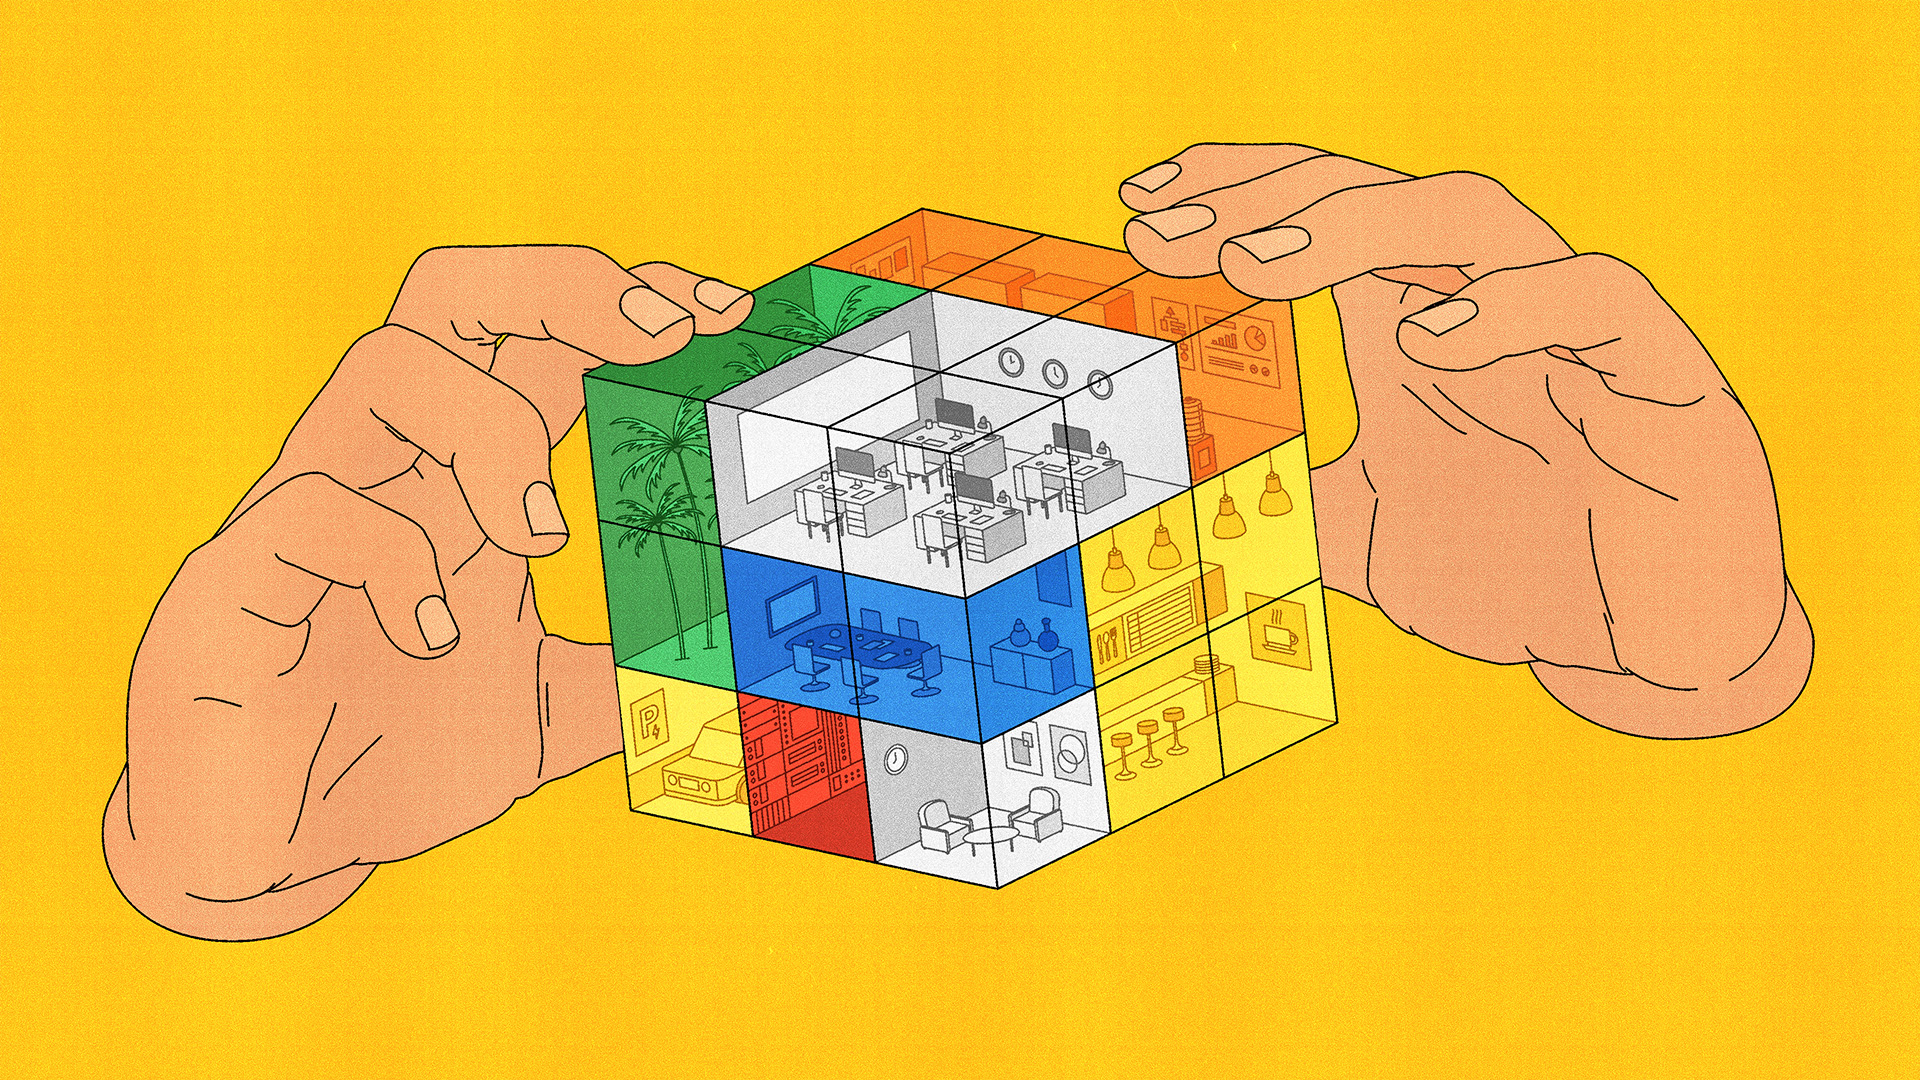 Floating hands solving a Rubik's cube made of parts of an office on a yellow background